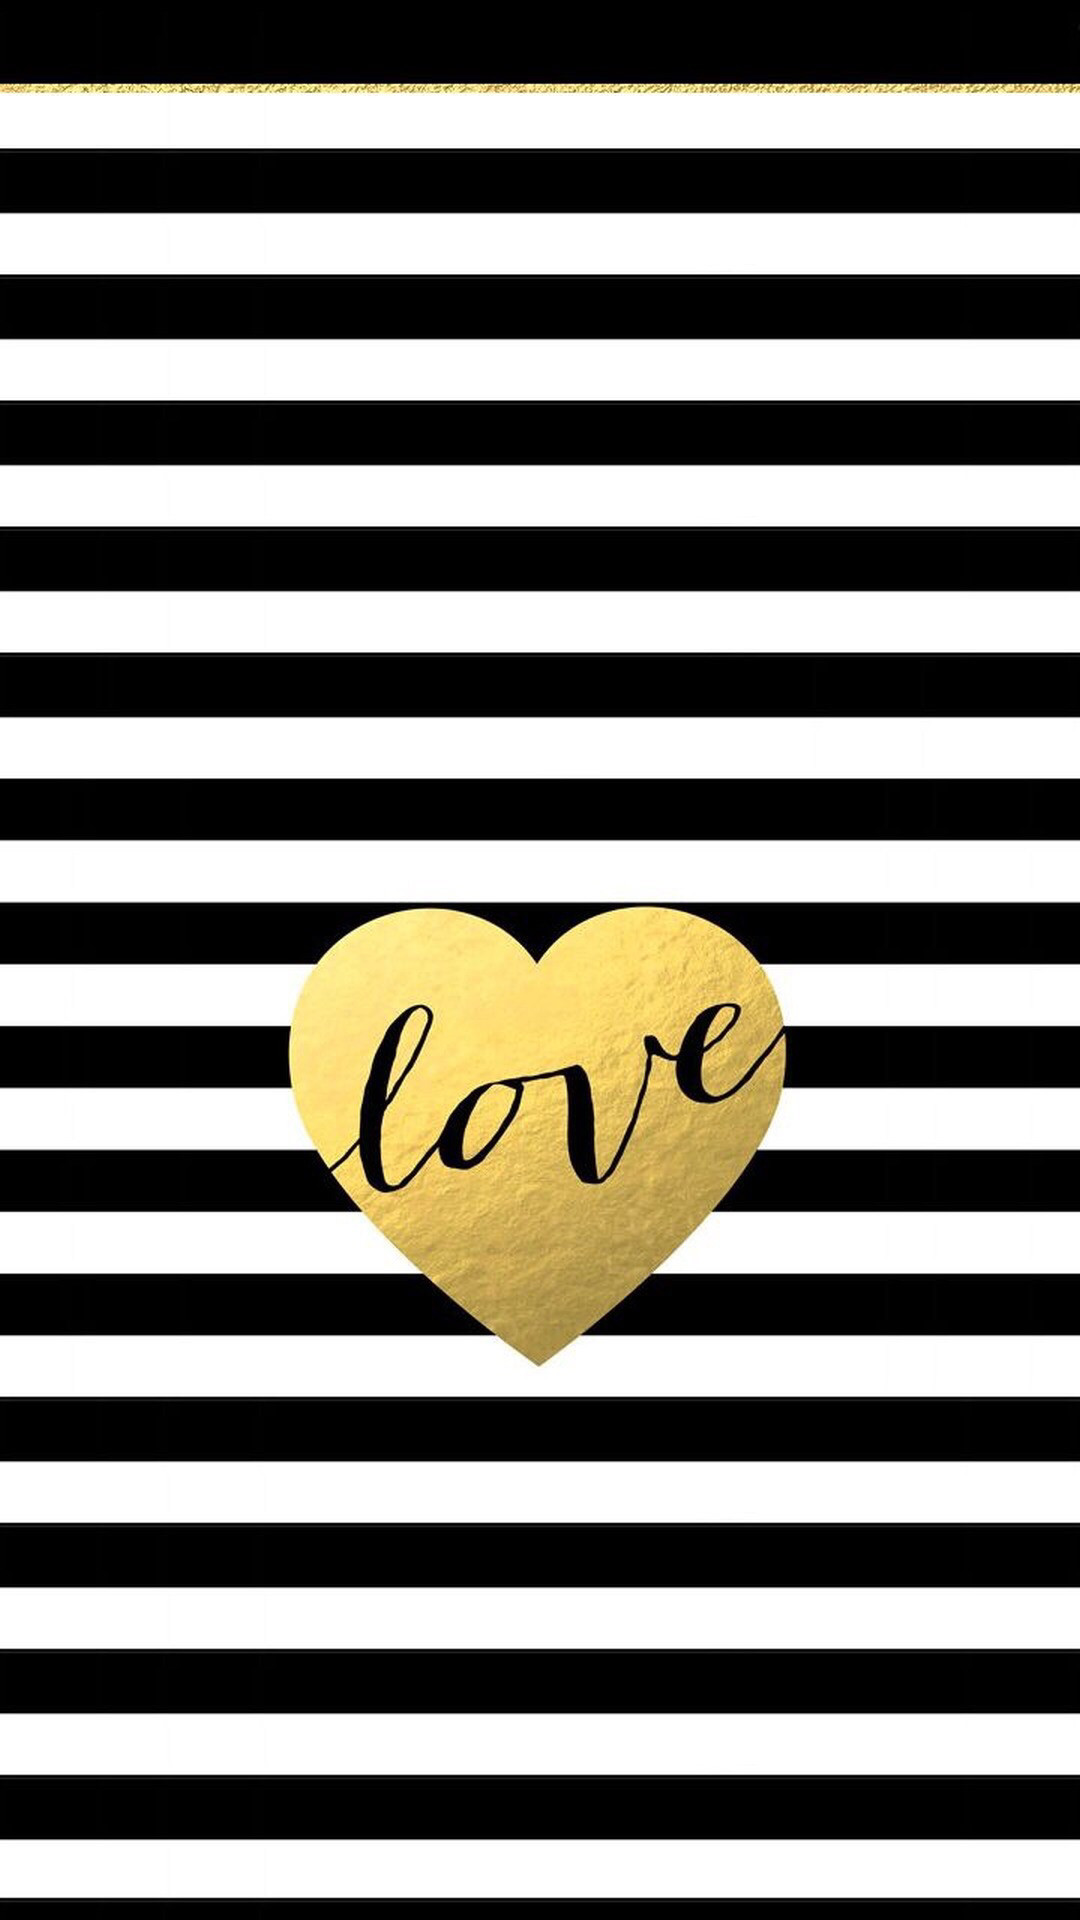 1080x1920 Black white stripes gold heart love iphone phone background wallpaper lock  screen by